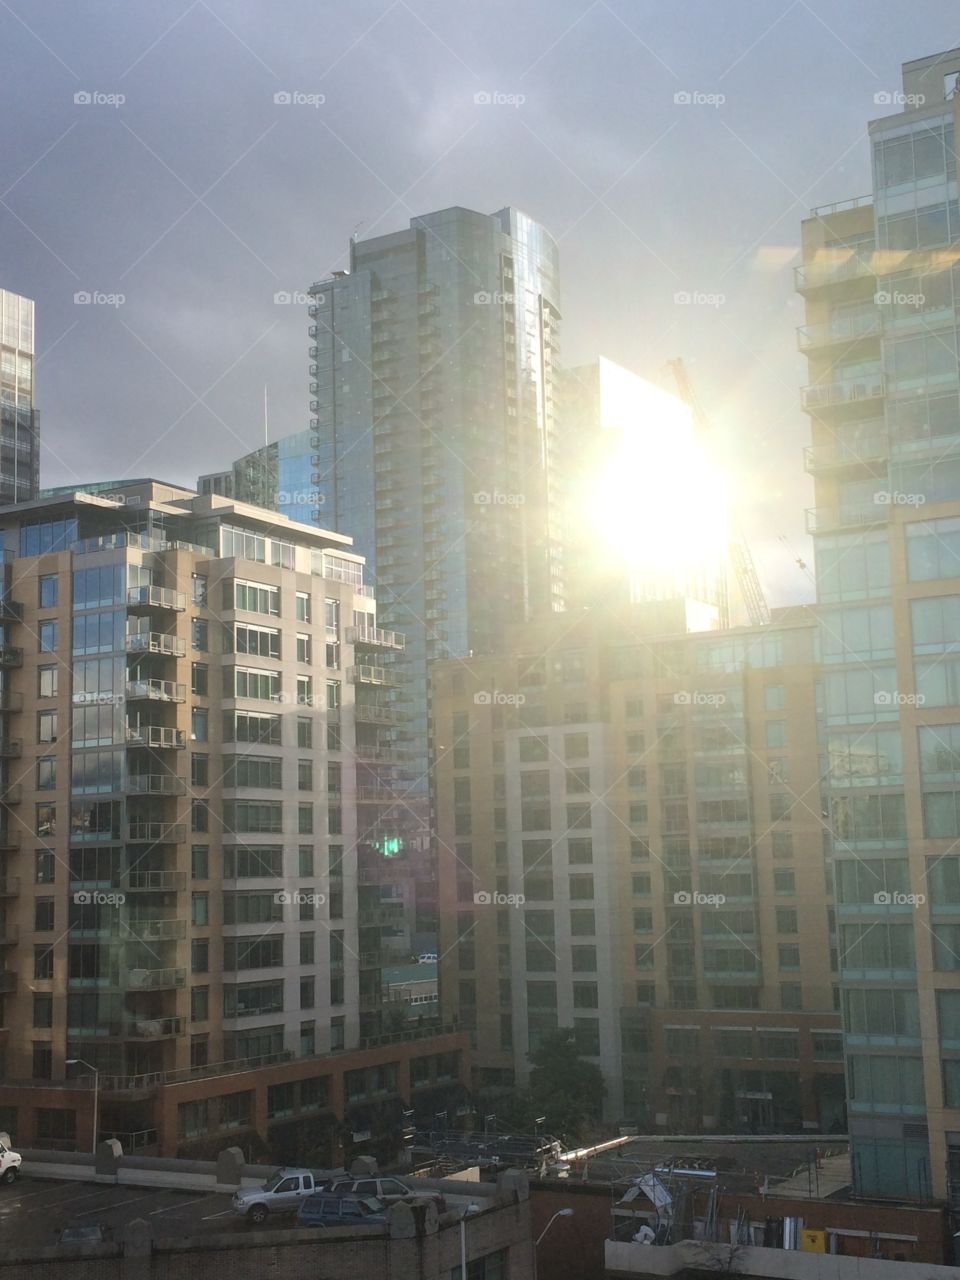 The setting sun reflecting off of sky scrapers in Seattle.